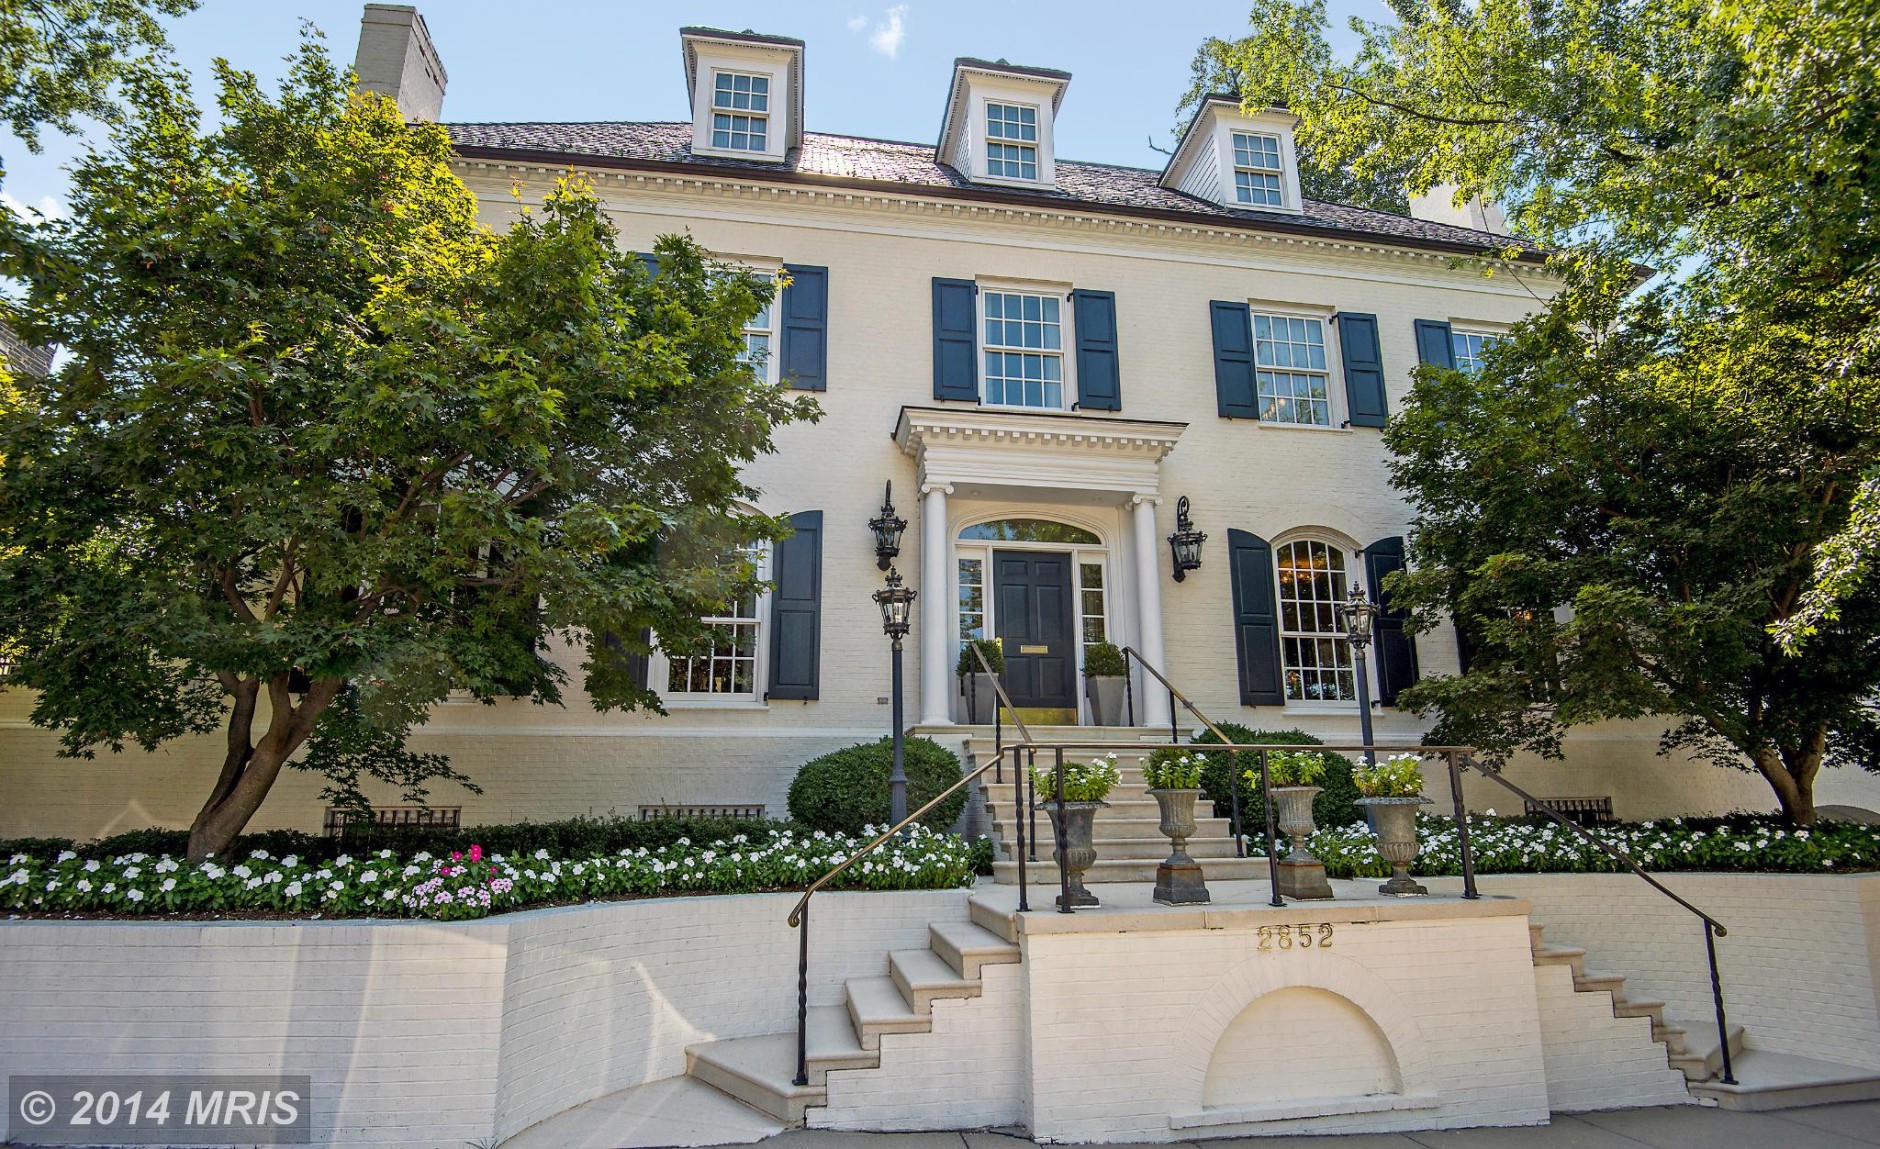 #9. This home, located at 2852 McGill Terrace NW, Washington D.C., sold for $5.6 million. (Metropolitan Regional Information Systems, Inc./Metropolitan Regional Information Systems, Inc.)